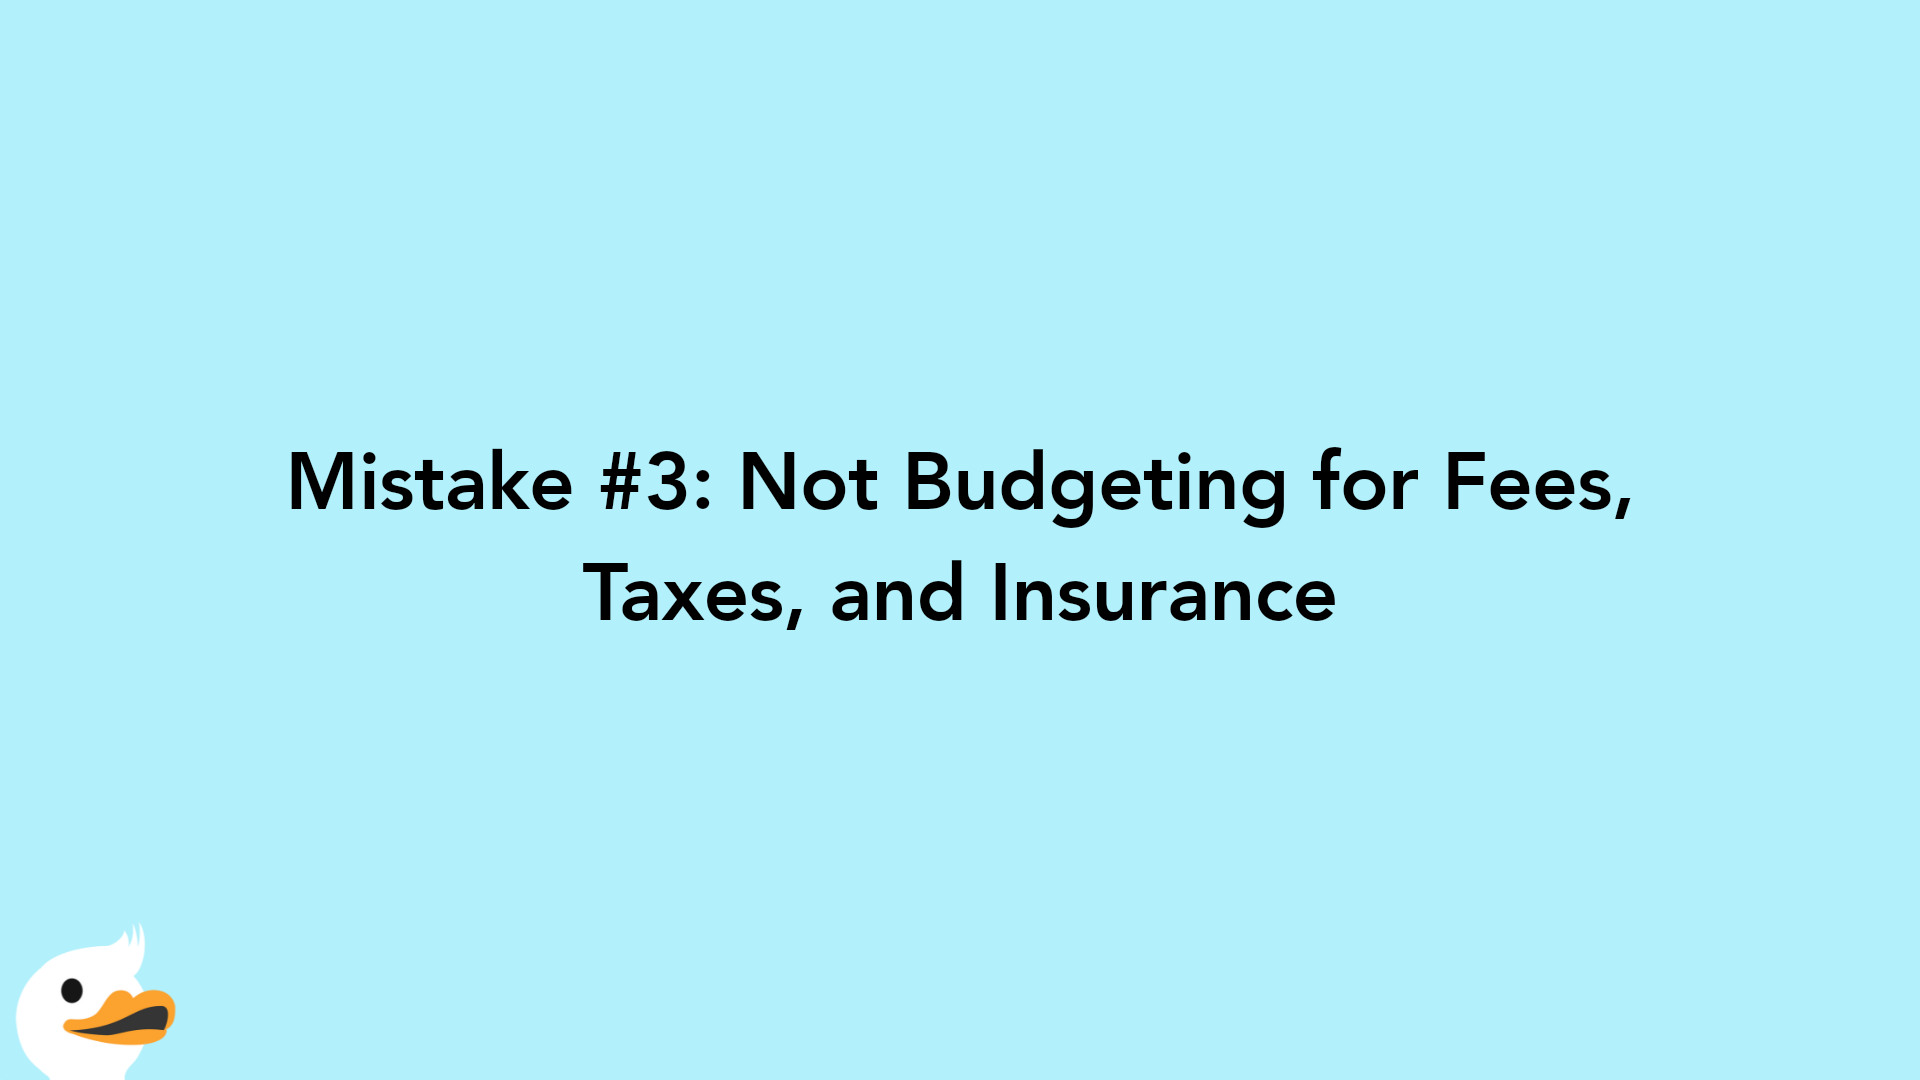 Mistake #3: Not Budgeting for Fees, Taxes, and Insurance